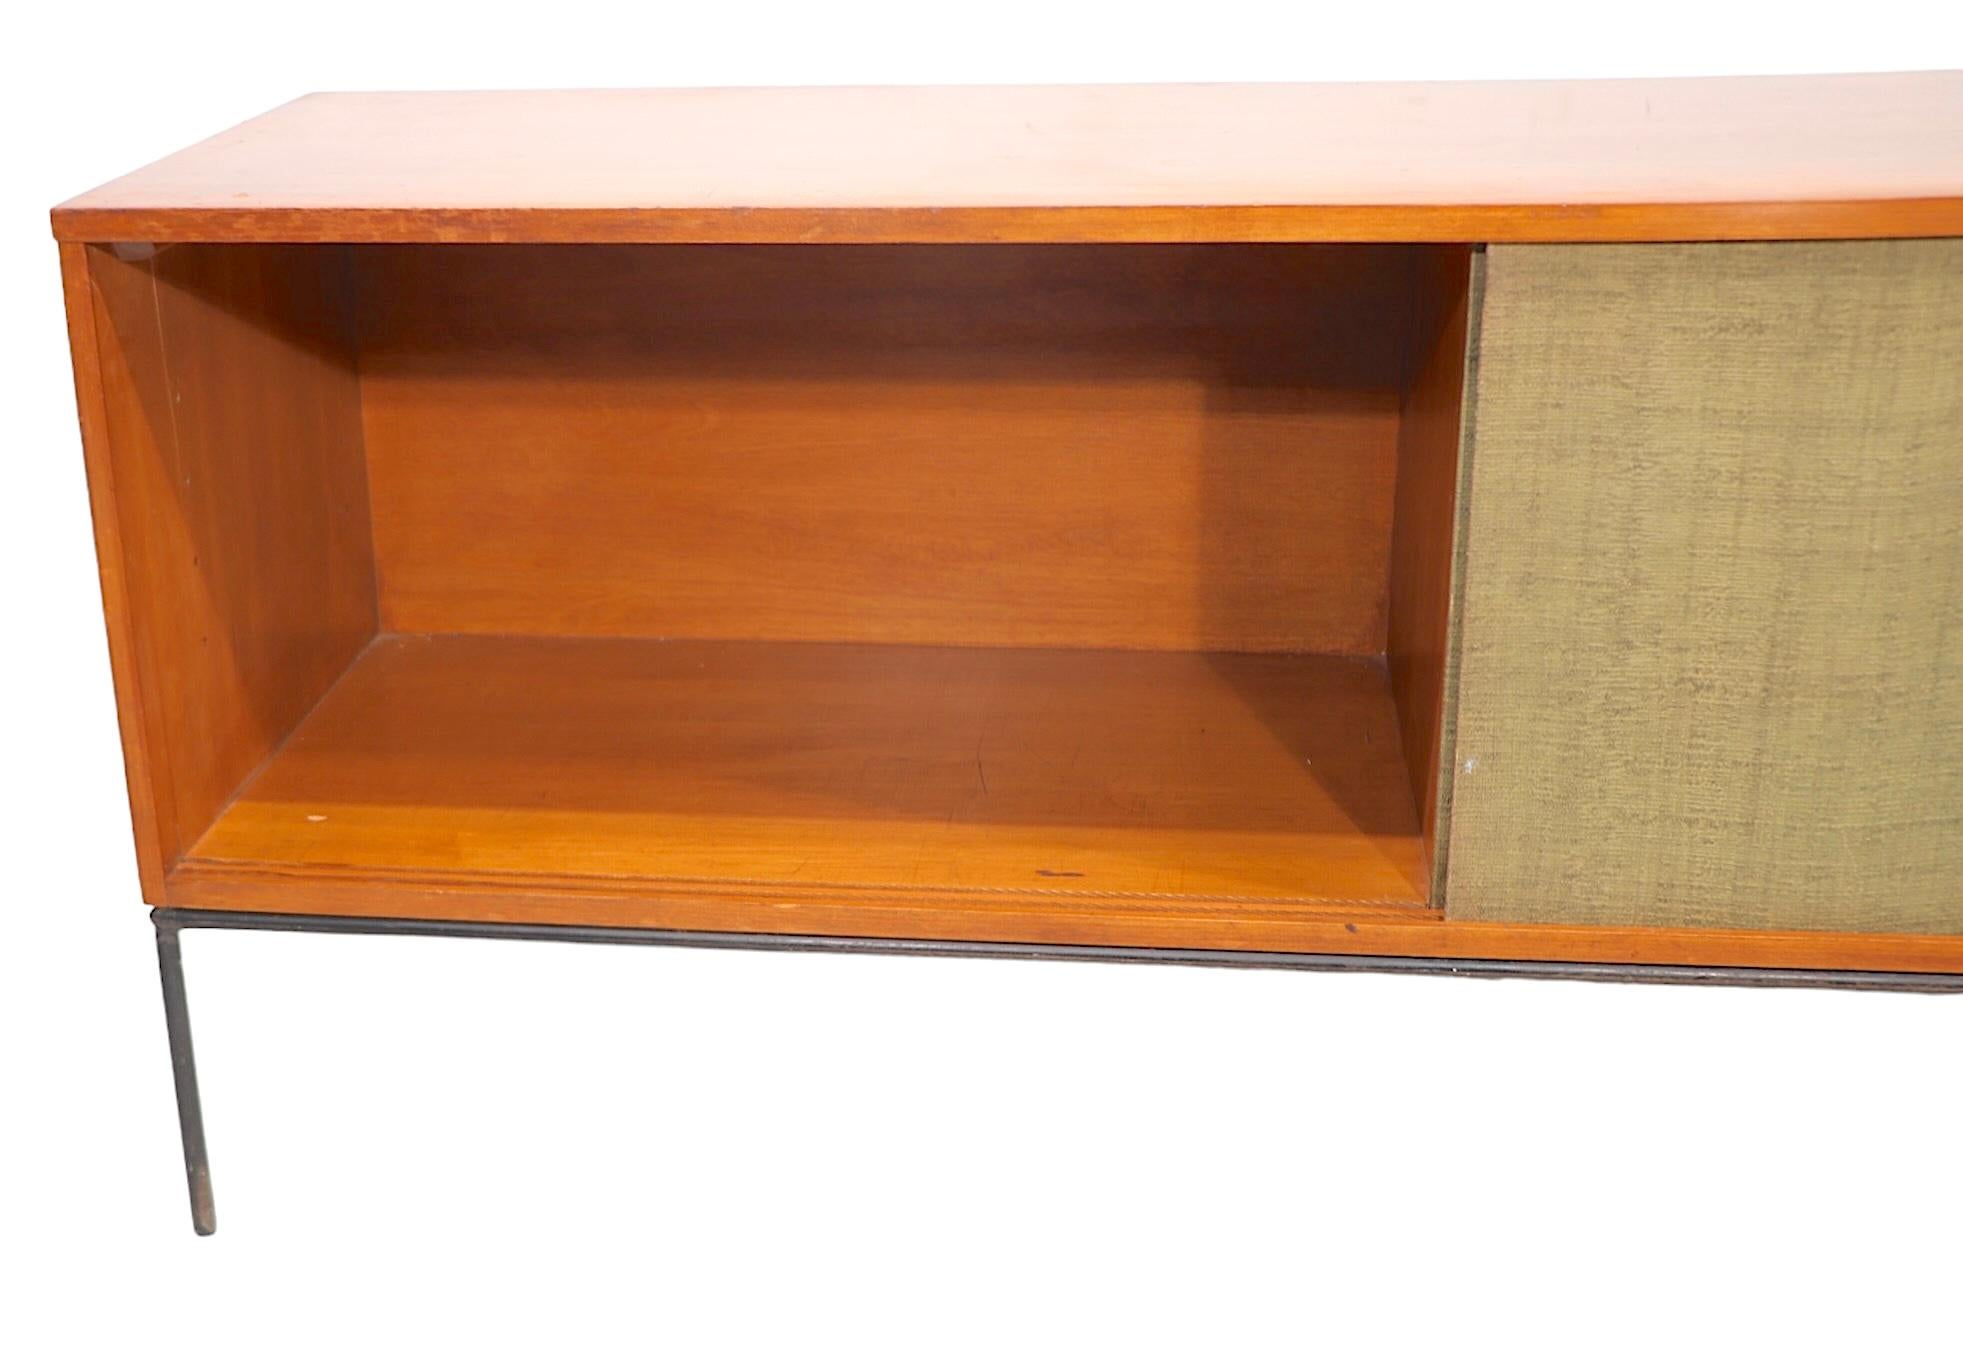  Mid Century Paul McCobb Winchendon  Planner Group Cabinet c. 1950's  For Sale 1